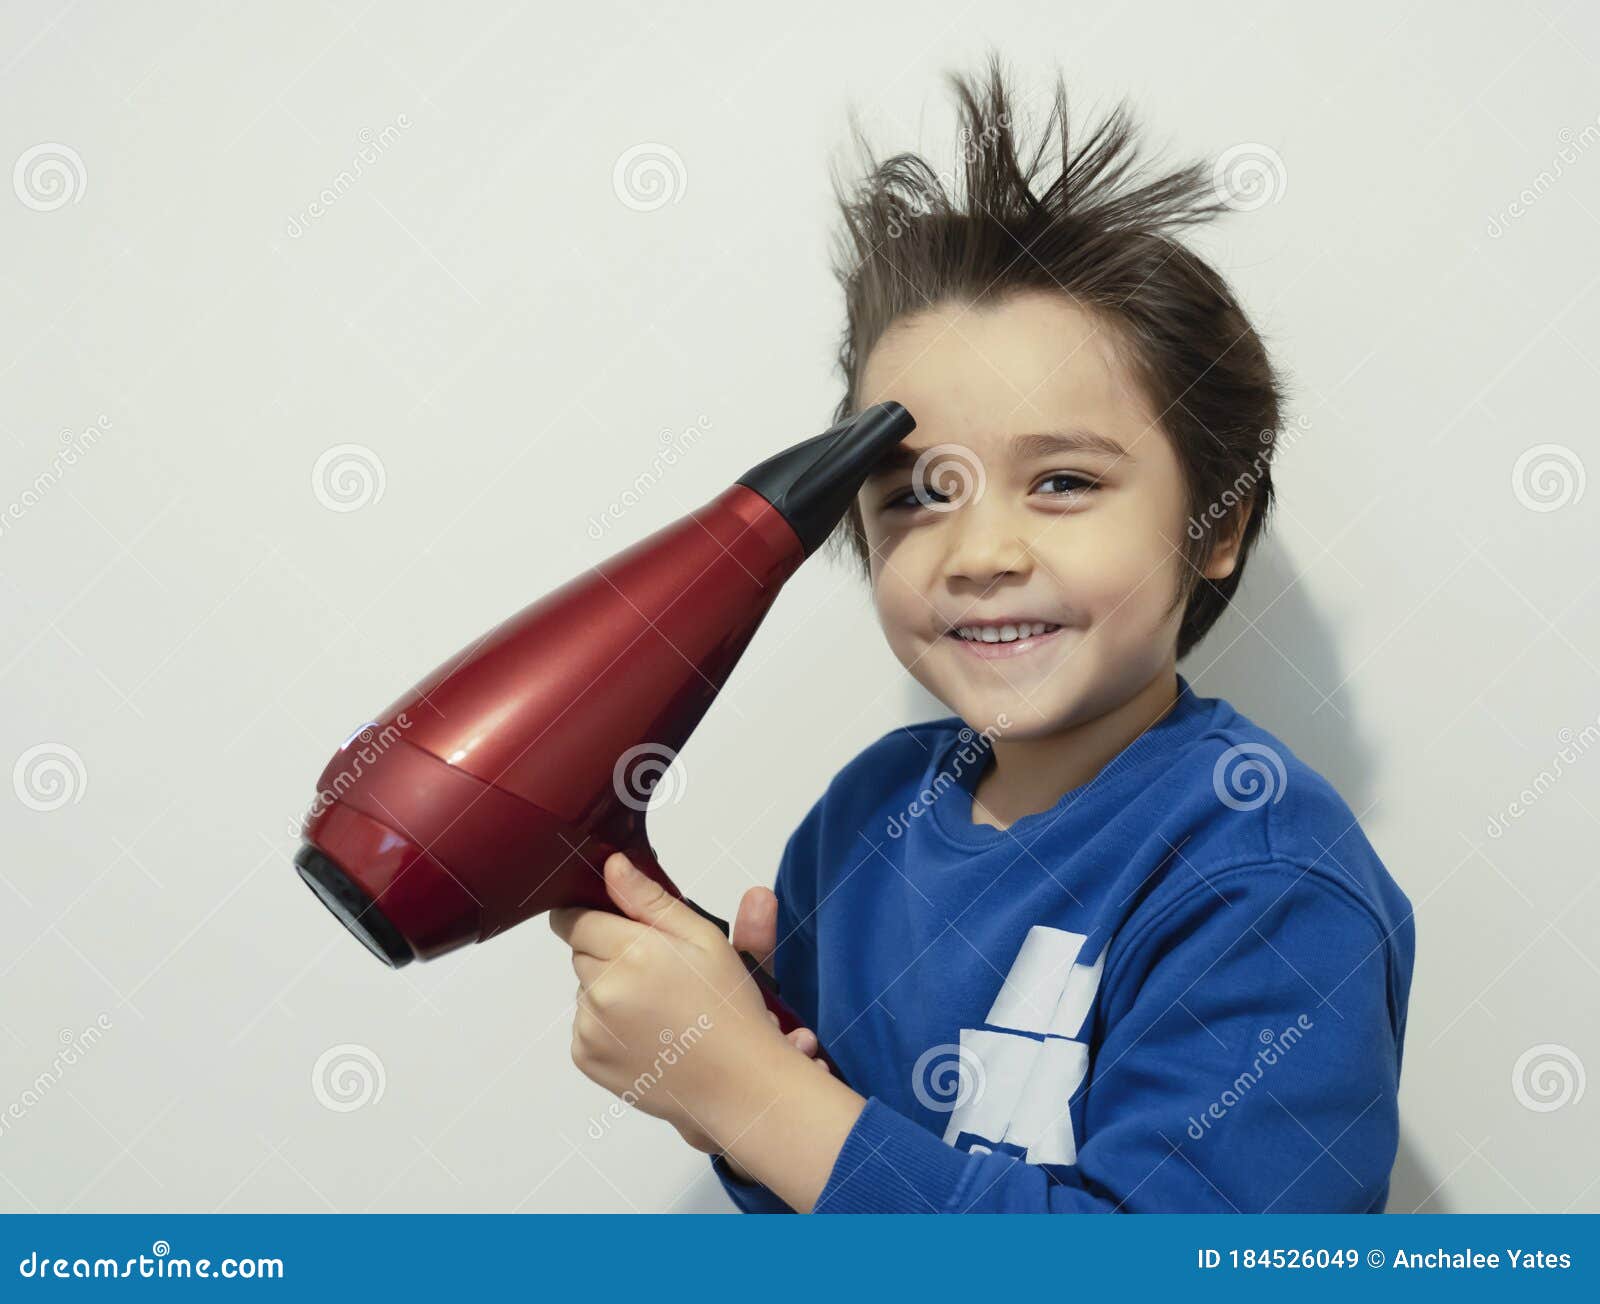 Candid Shot, Cute Kid Drying His Hair with Hair Dryer, Cheerful 6 Years Old  Boy Try To Making His Hair Like a Crazy Expression, Stock Image - Image of  cute, attractive: 184526049